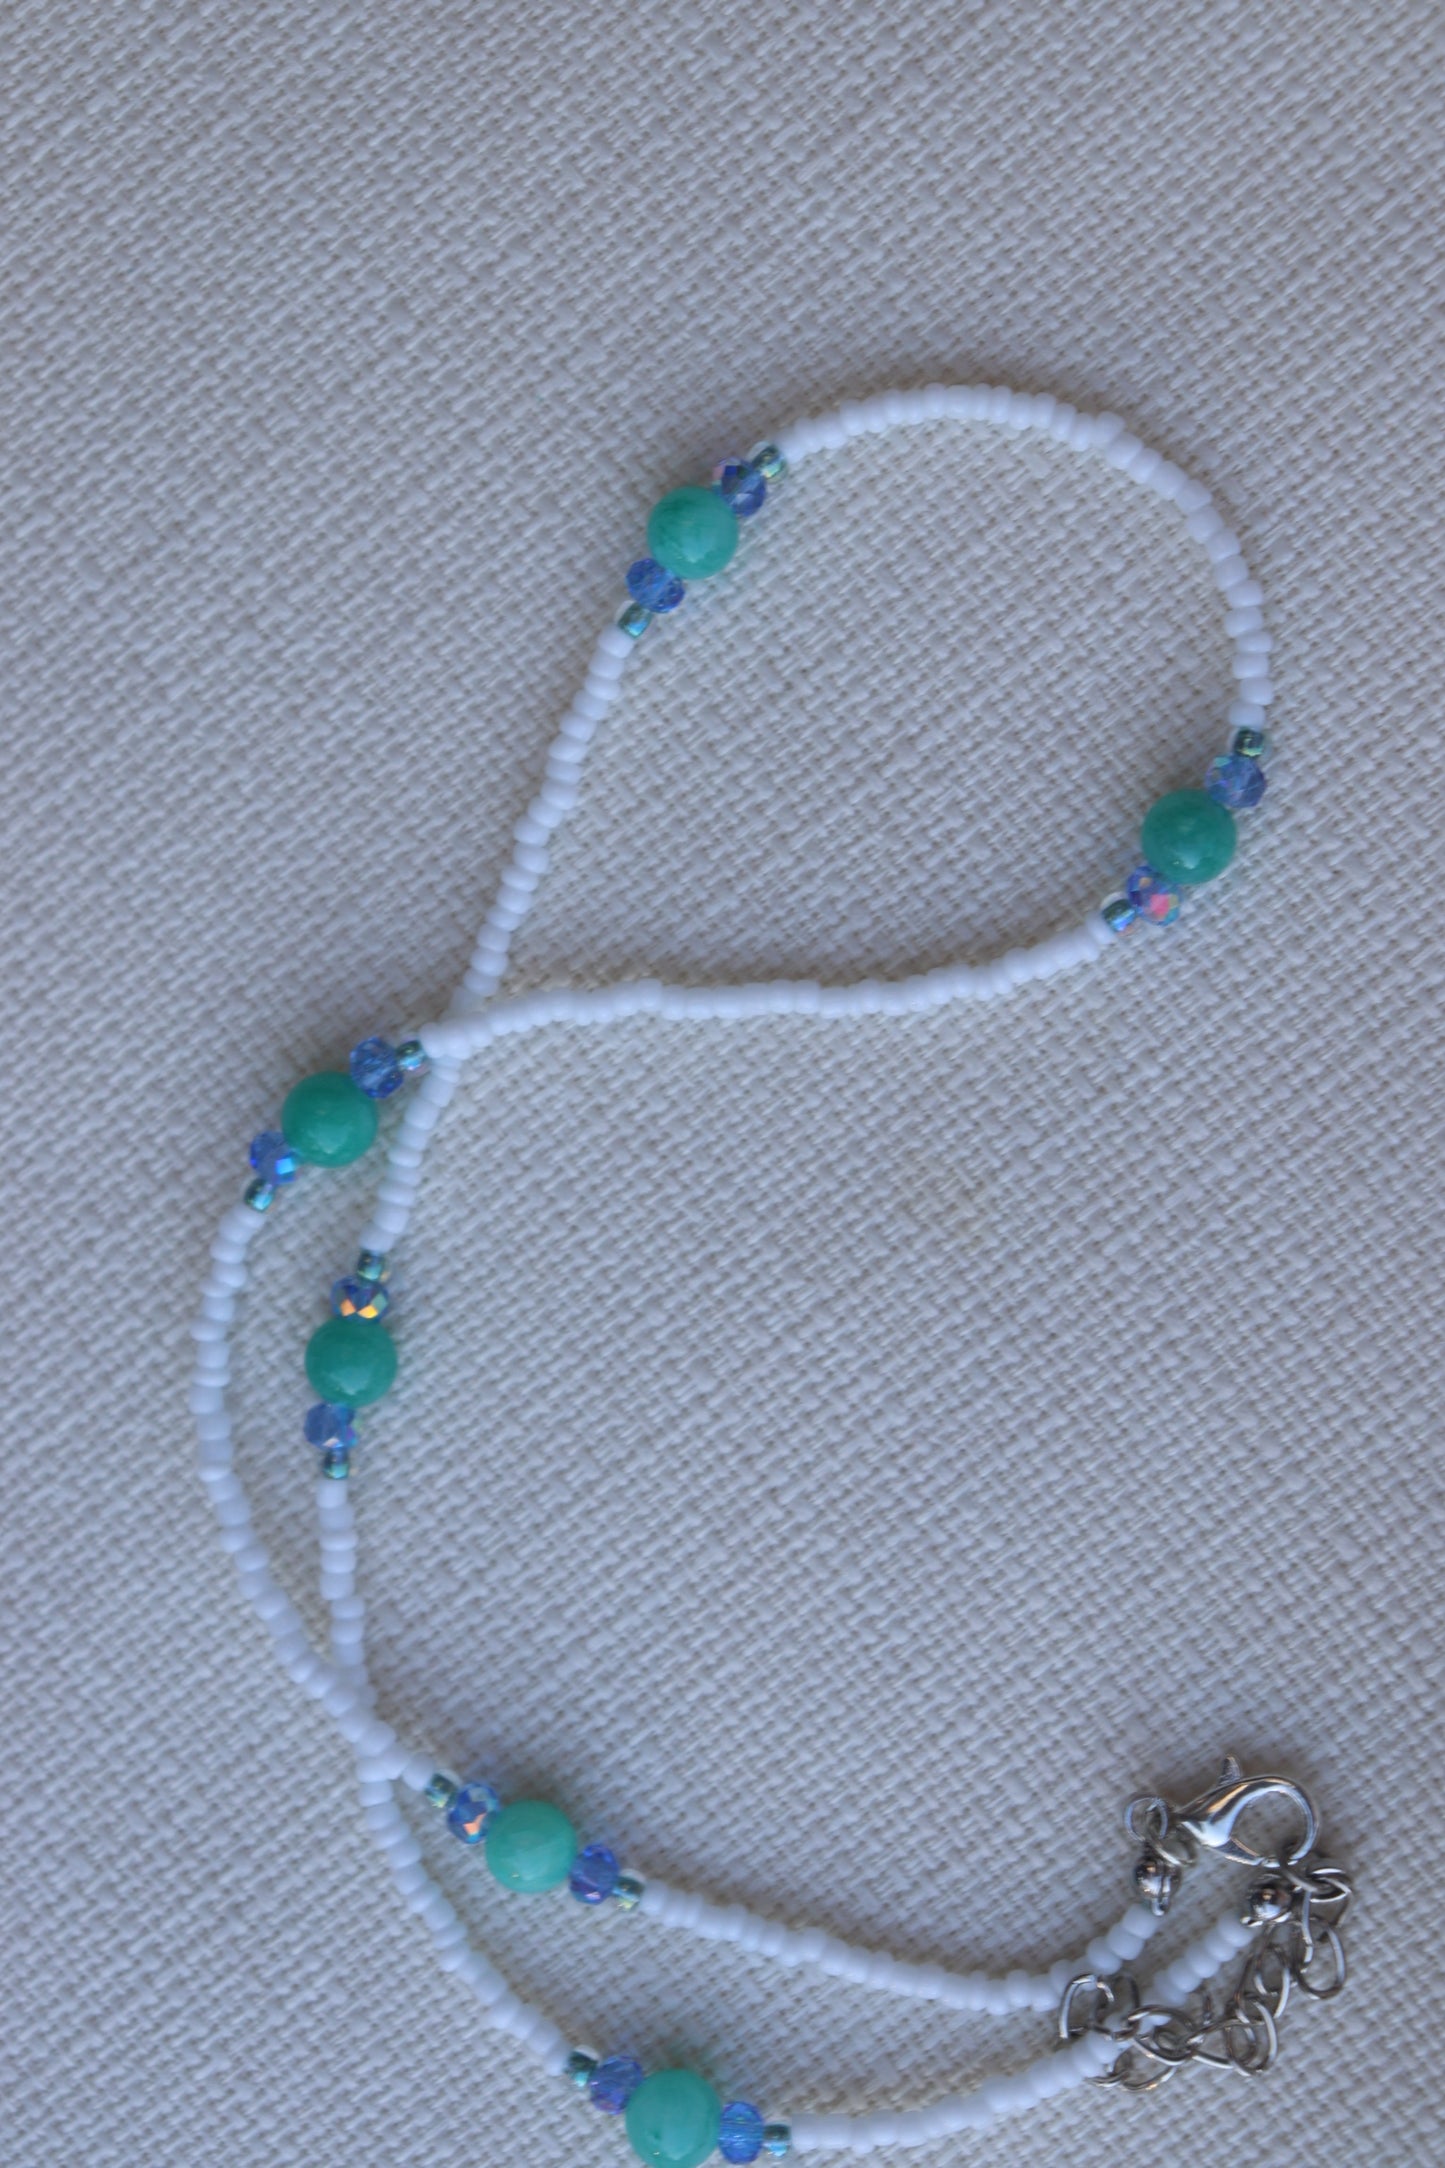 White and teal stones